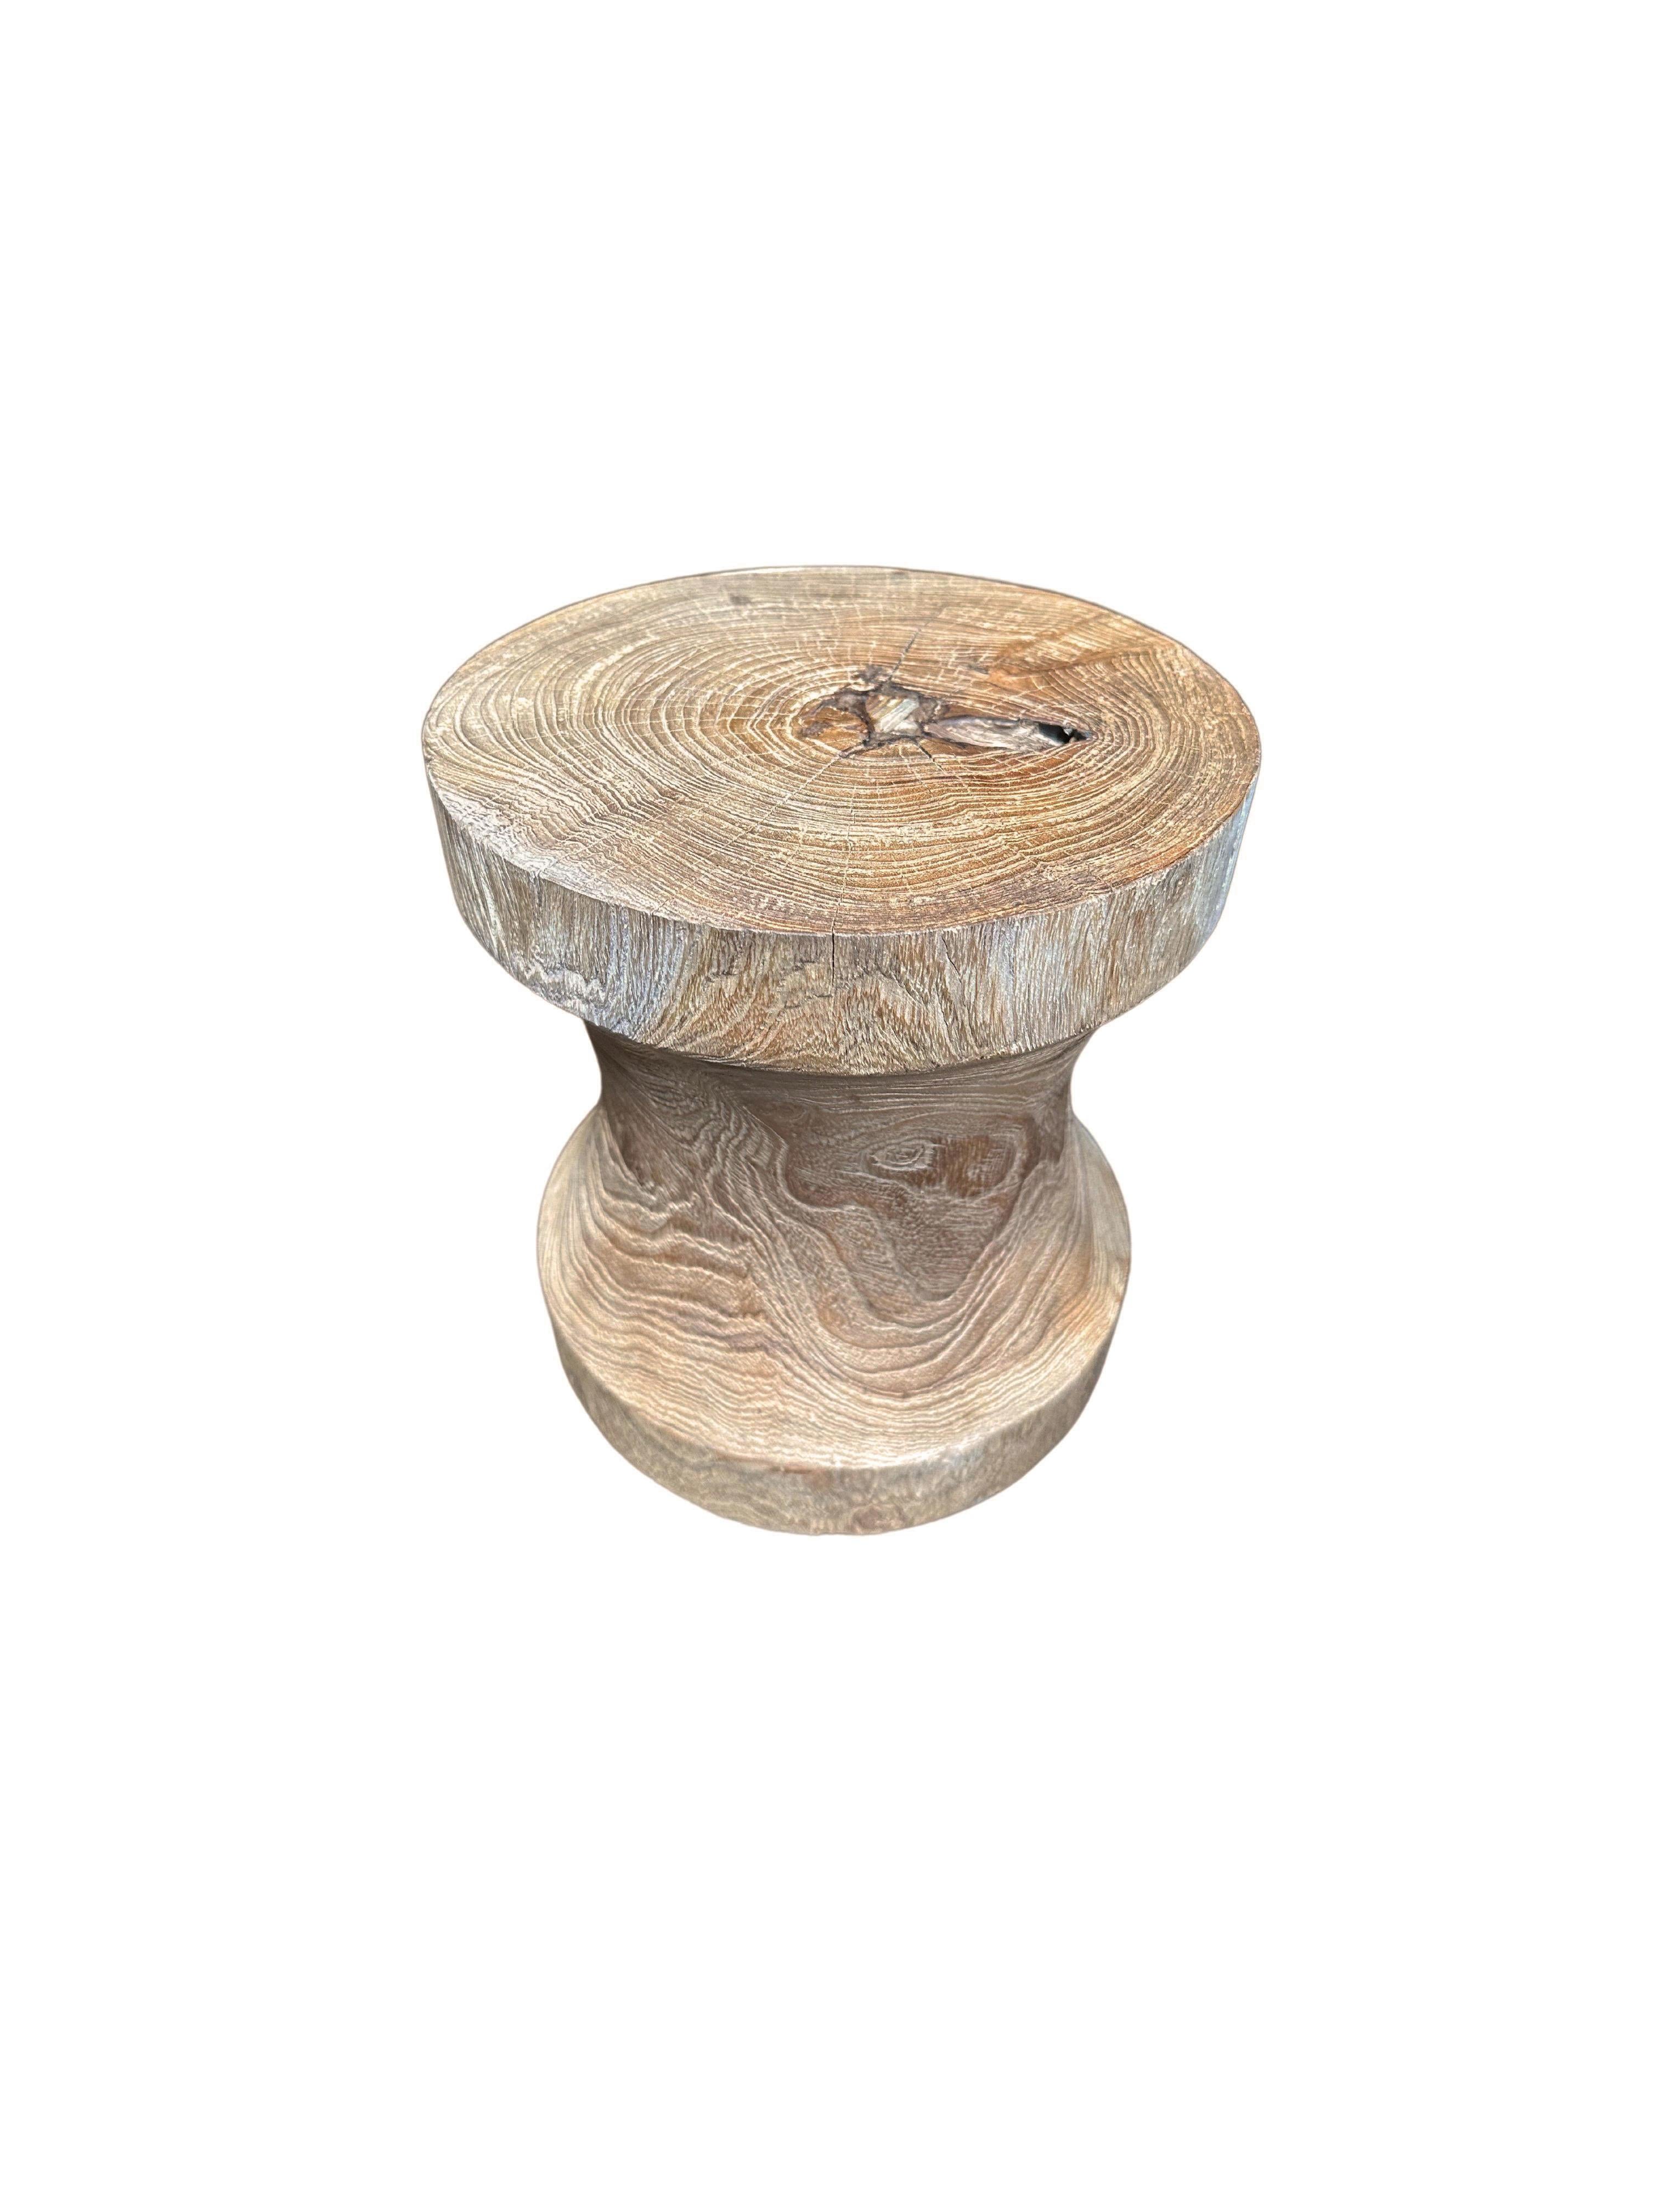 Sculptural Side Table Crafted from Teak Wood, With Stunning Textures In Good Condition For Sale In Jimbaran, Bali